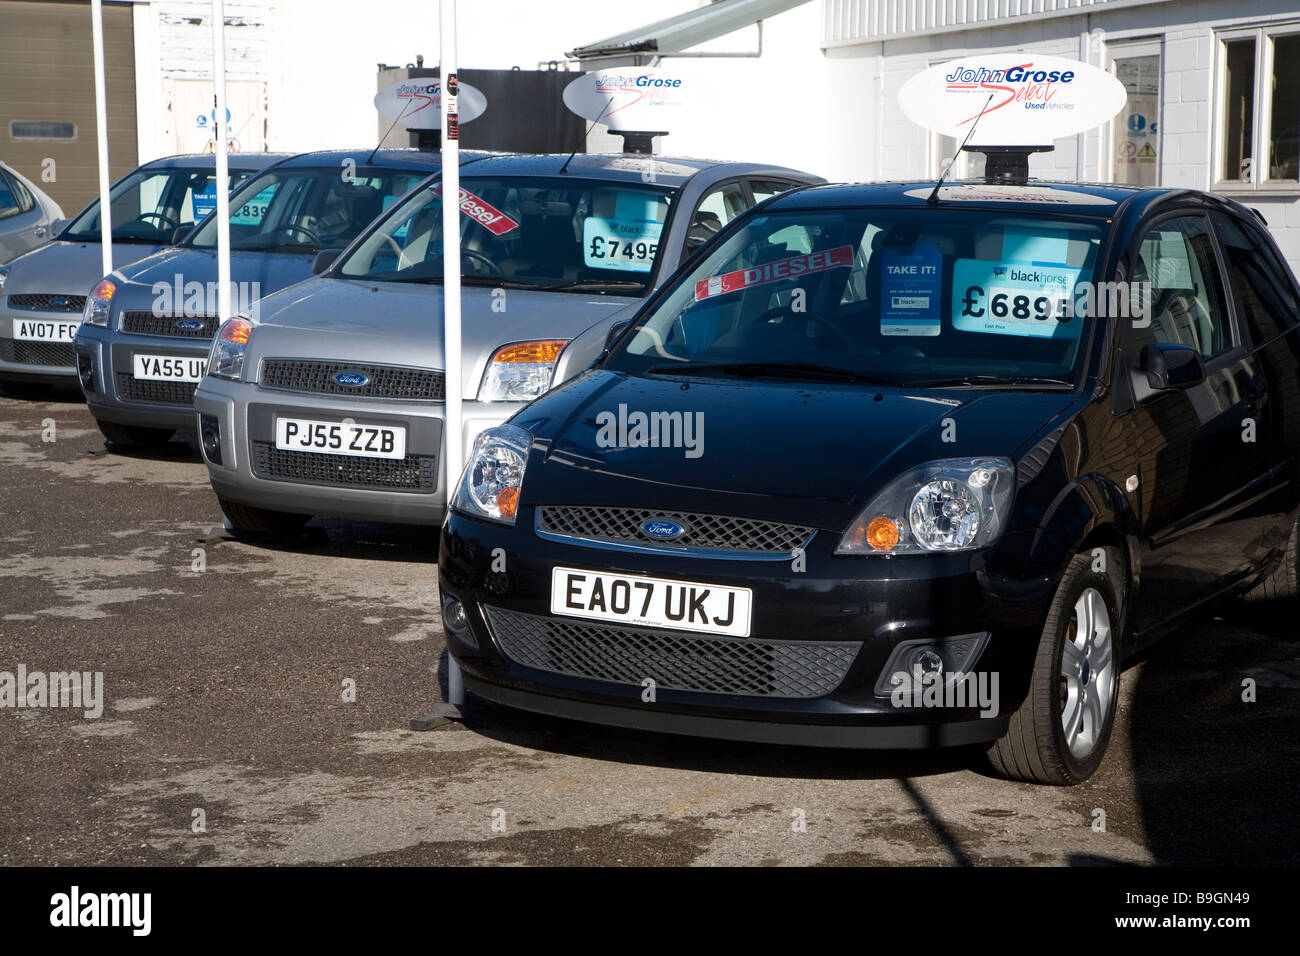 Second hand used cars for sale on garage forecourt Stock Photo